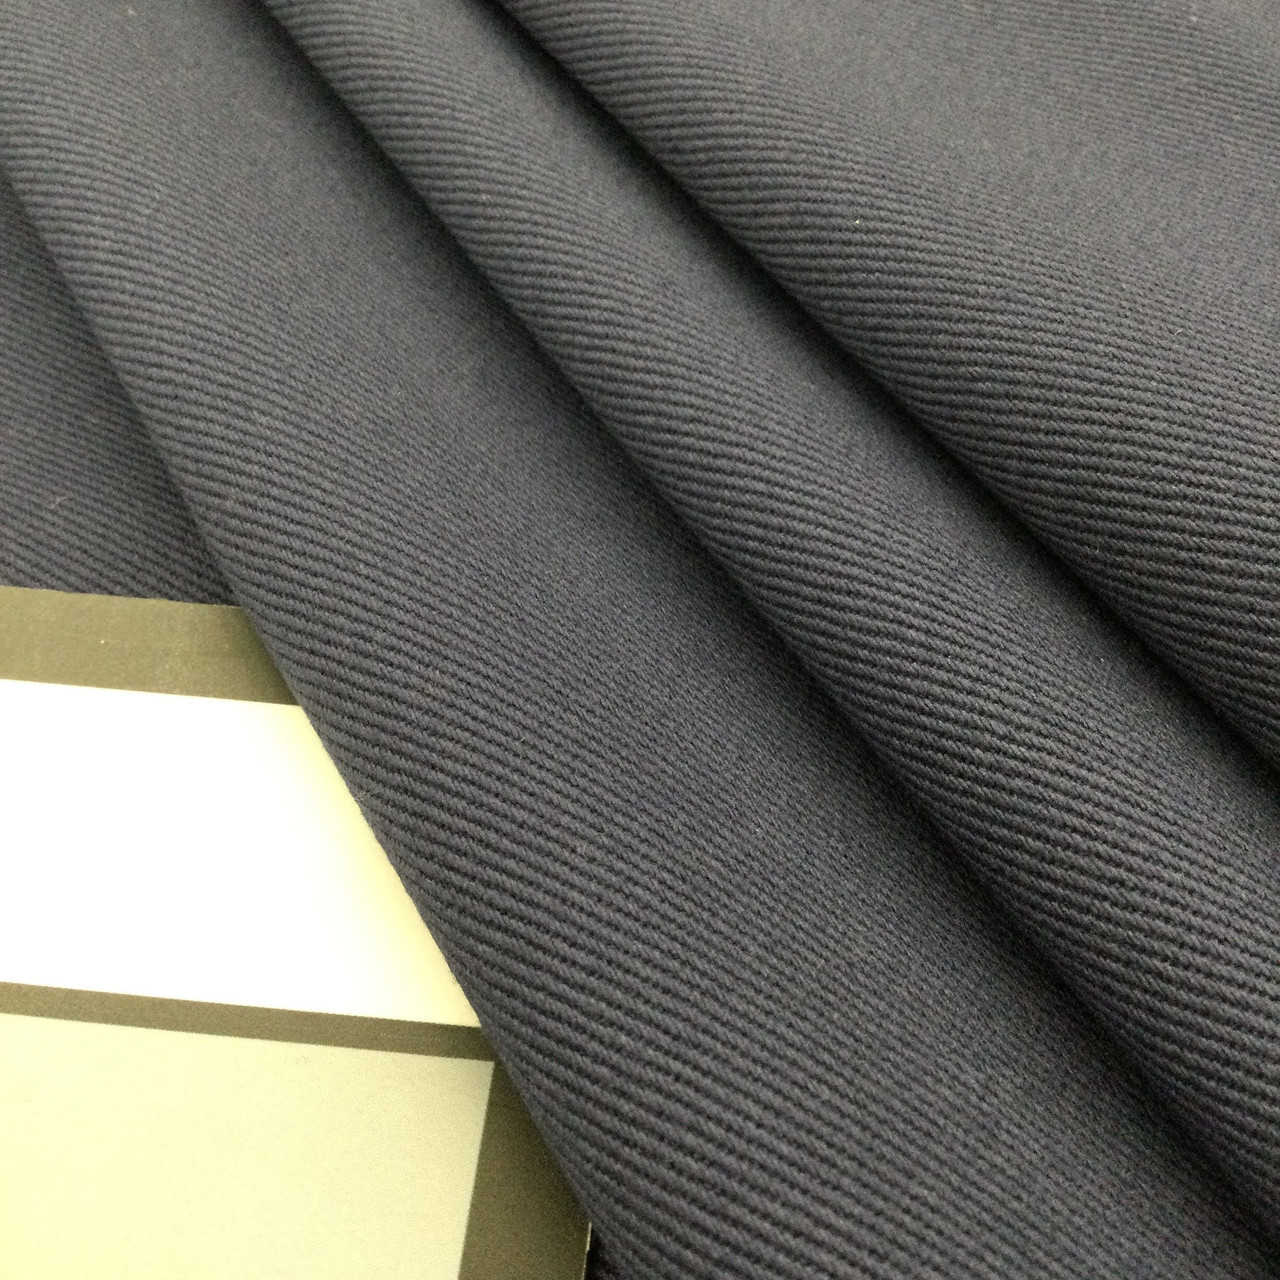 Black Polyester Cotton Twill Fabric - Twill Fabric by the Yard